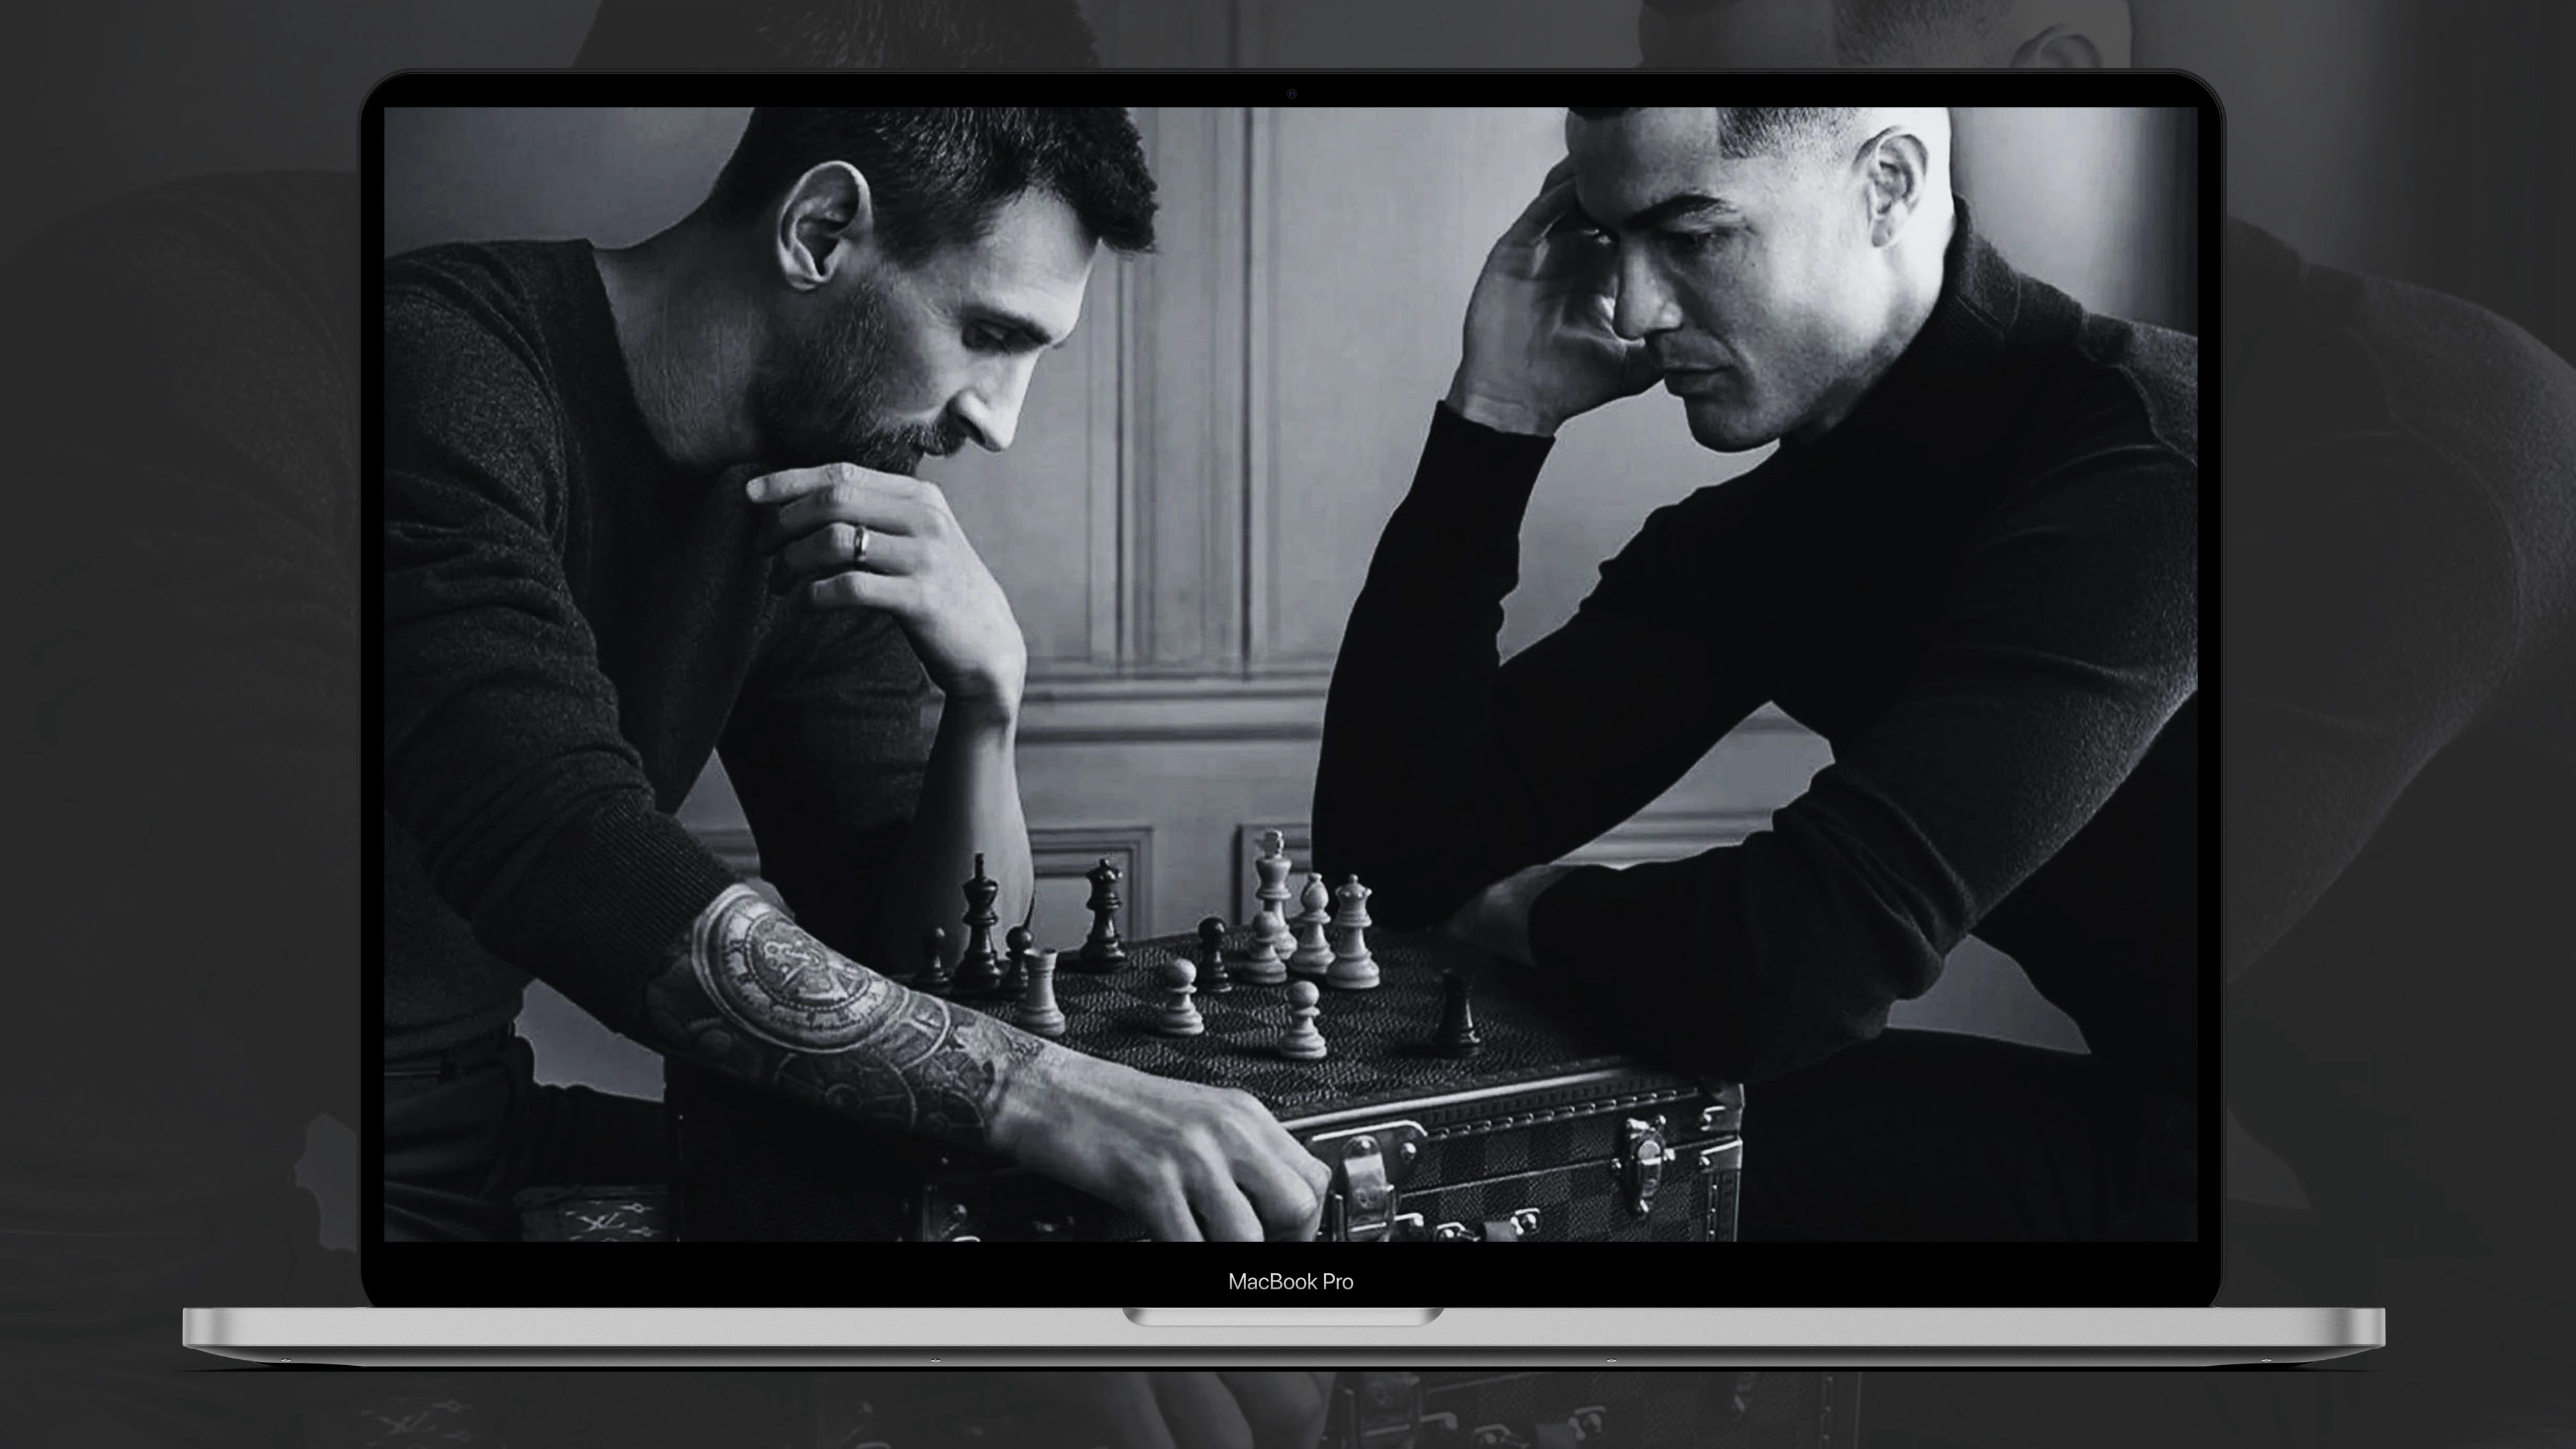 Check mate Messi and Ronaldo square up in chess picture ahead of World Cup   Goalcom